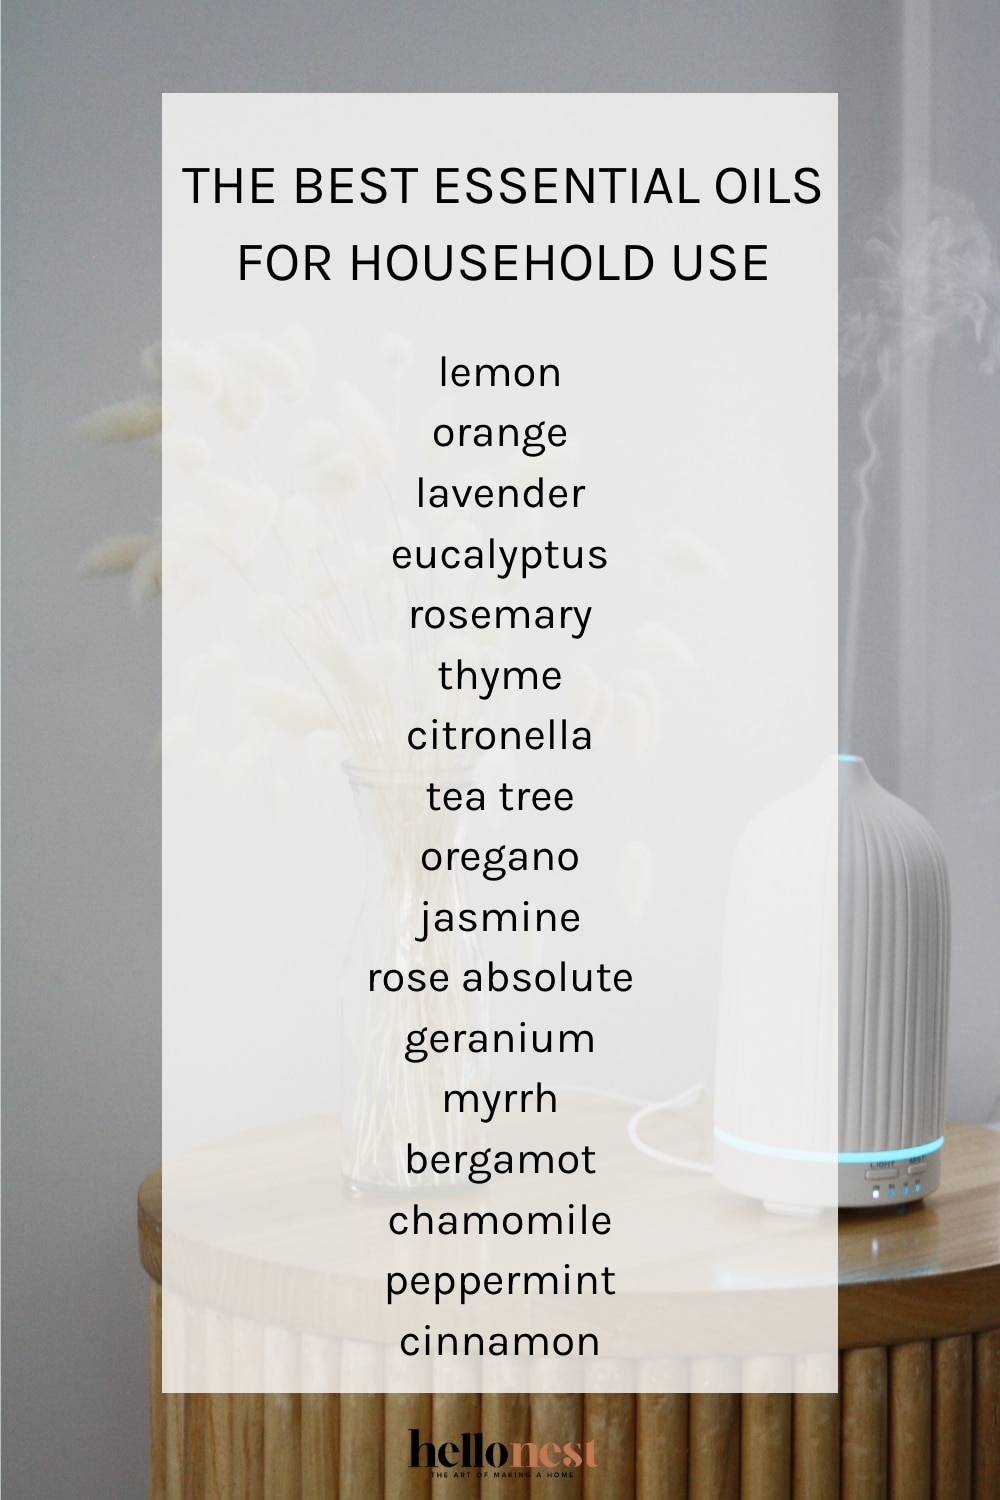 The Best Essential Oils for Home